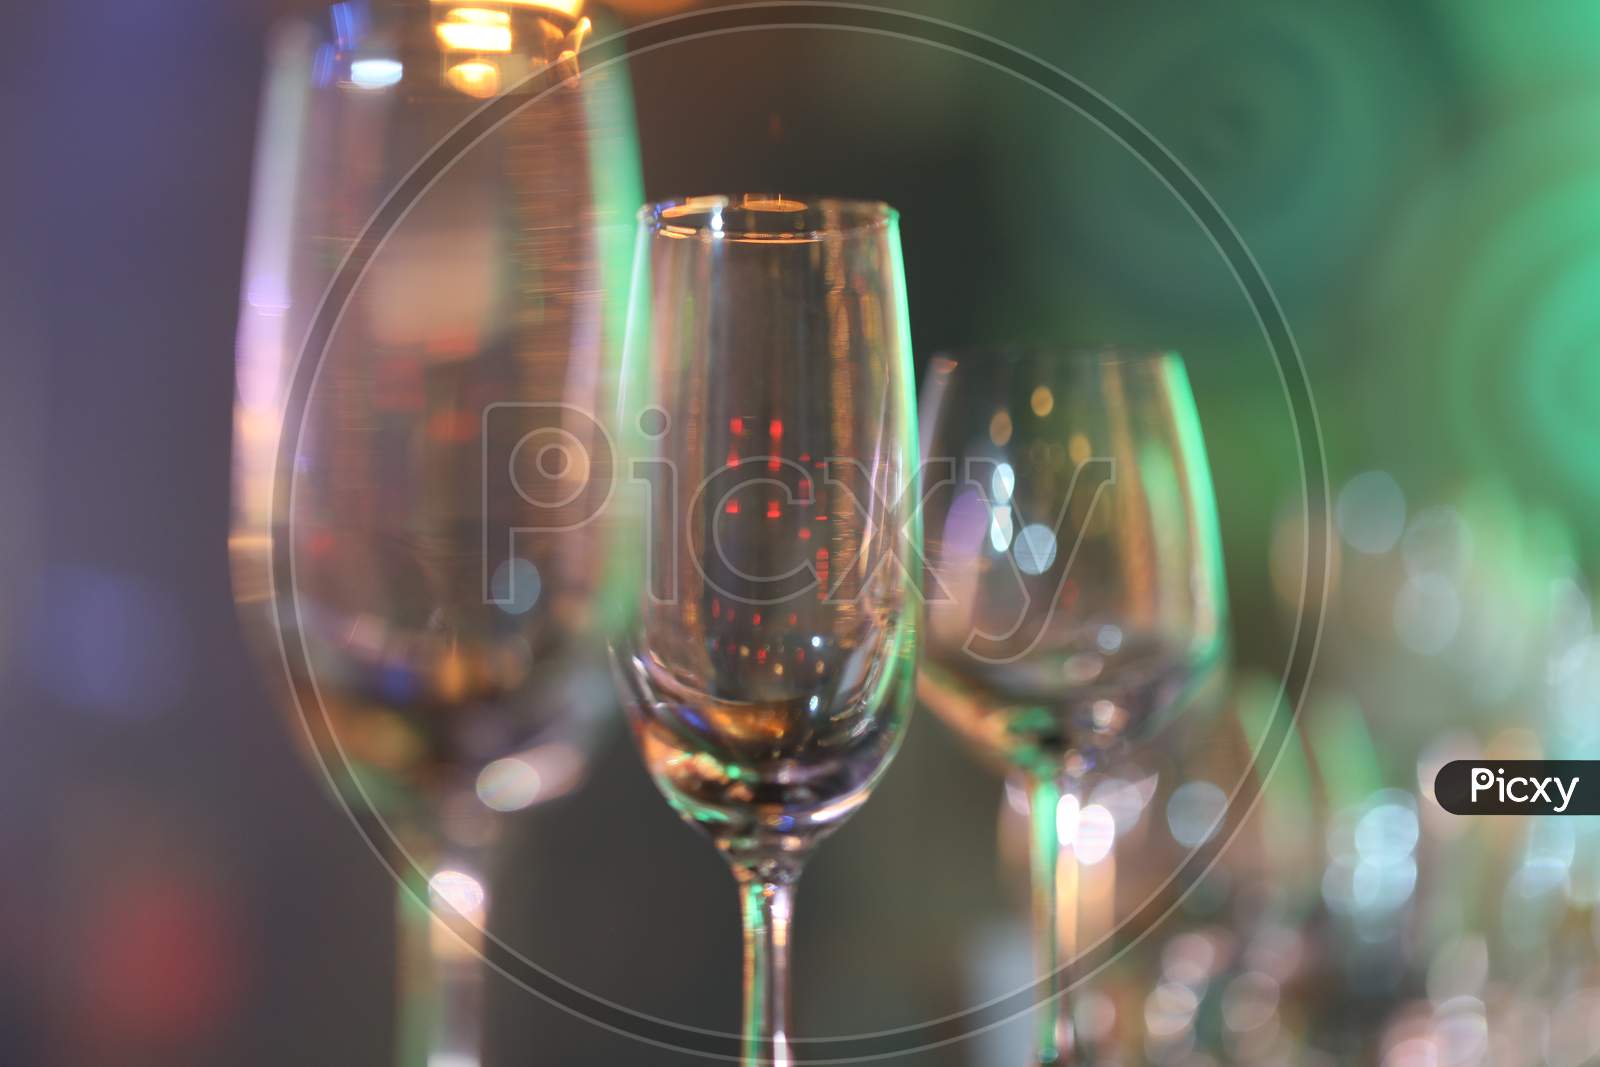 Wine Glasses At a Bar Counter With Neon Lights Flare